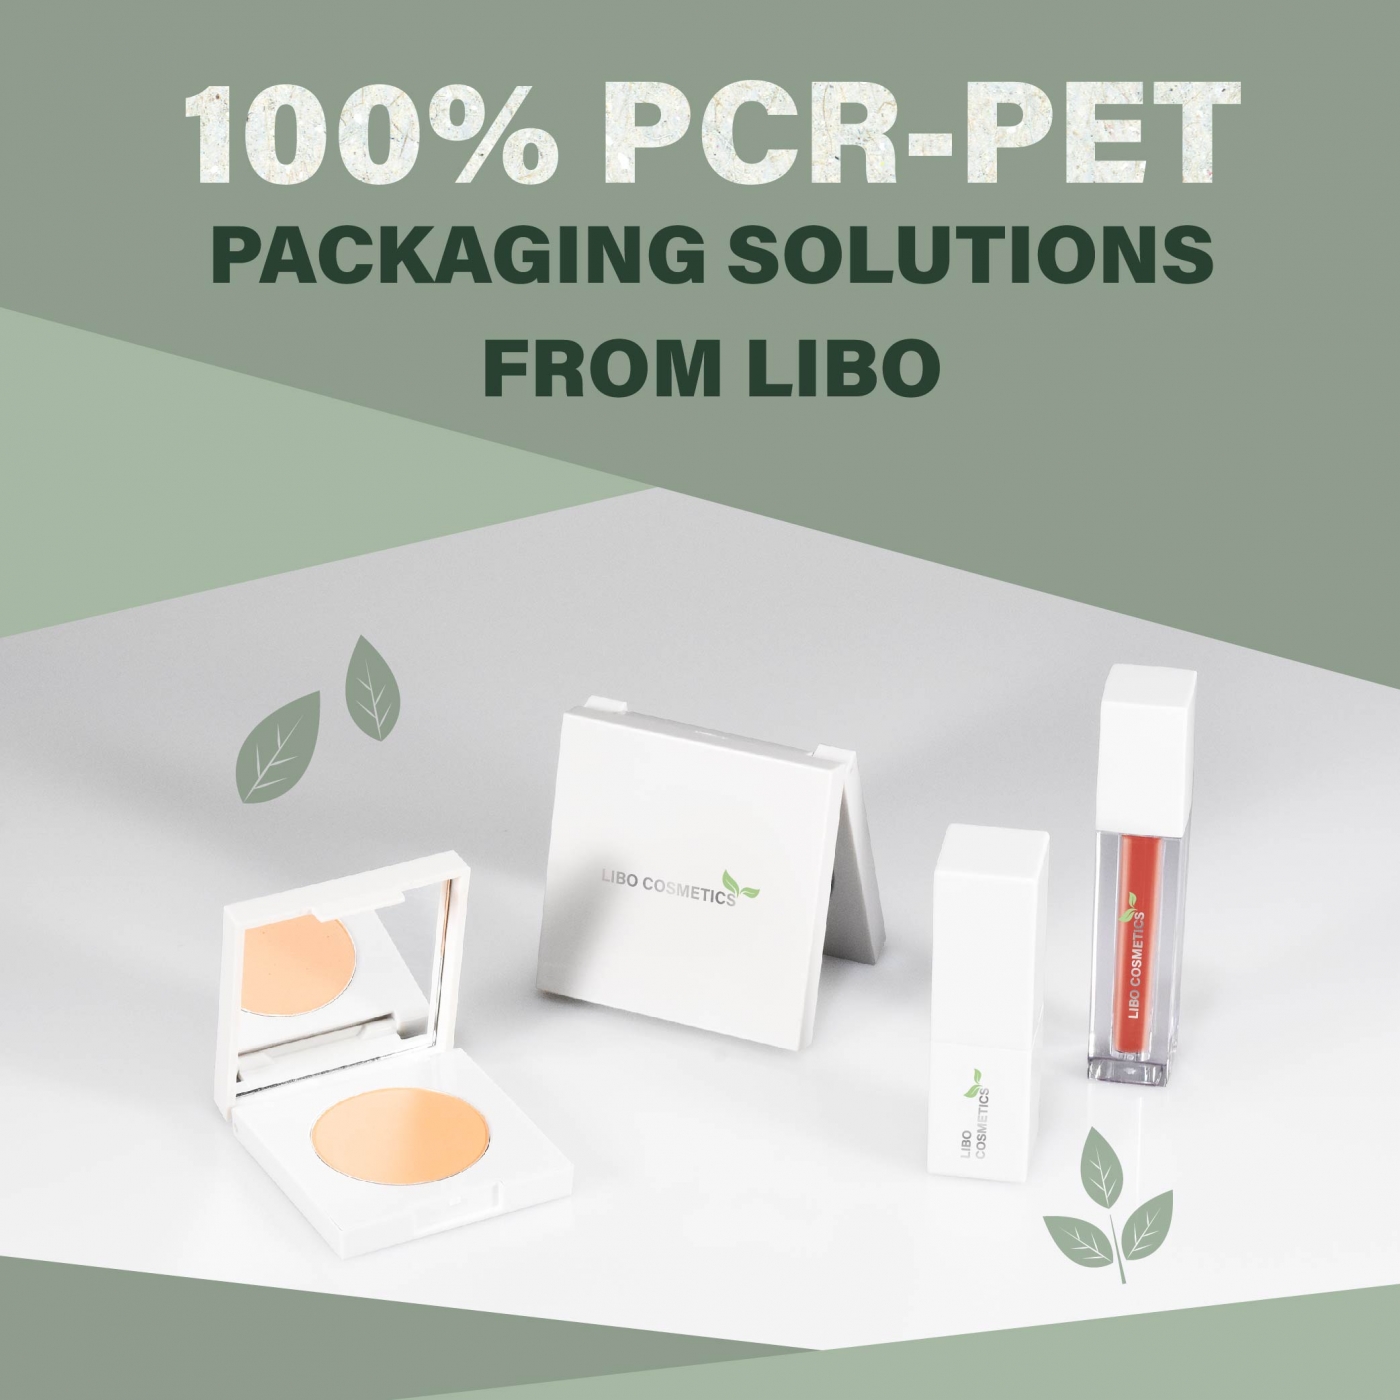 100% PCR-PET PACKAGING SOLUTIONS FROM LIBO 